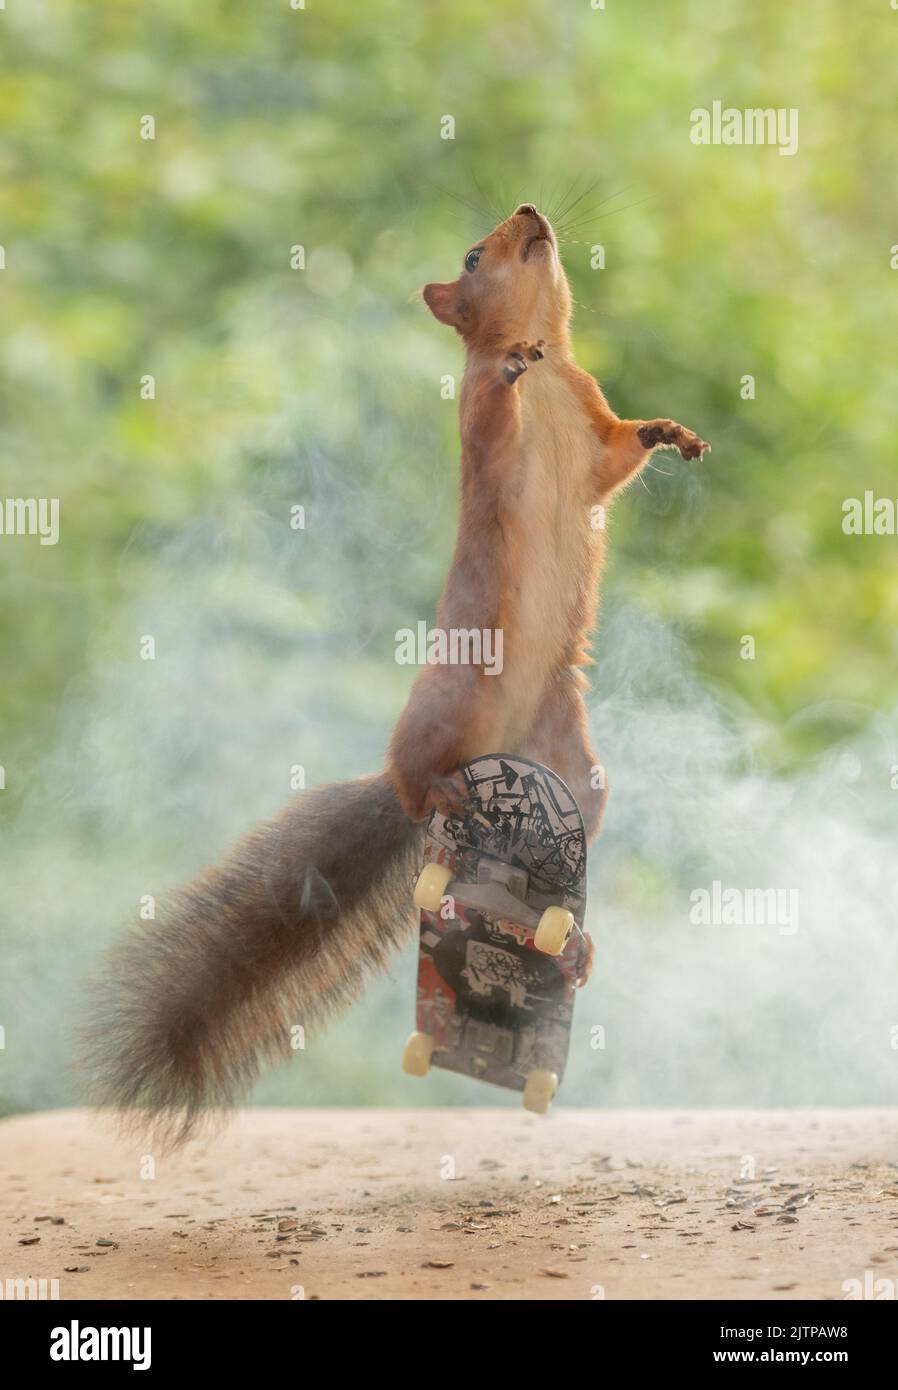 red squirrel is standing with an Skateboard Stock Photo